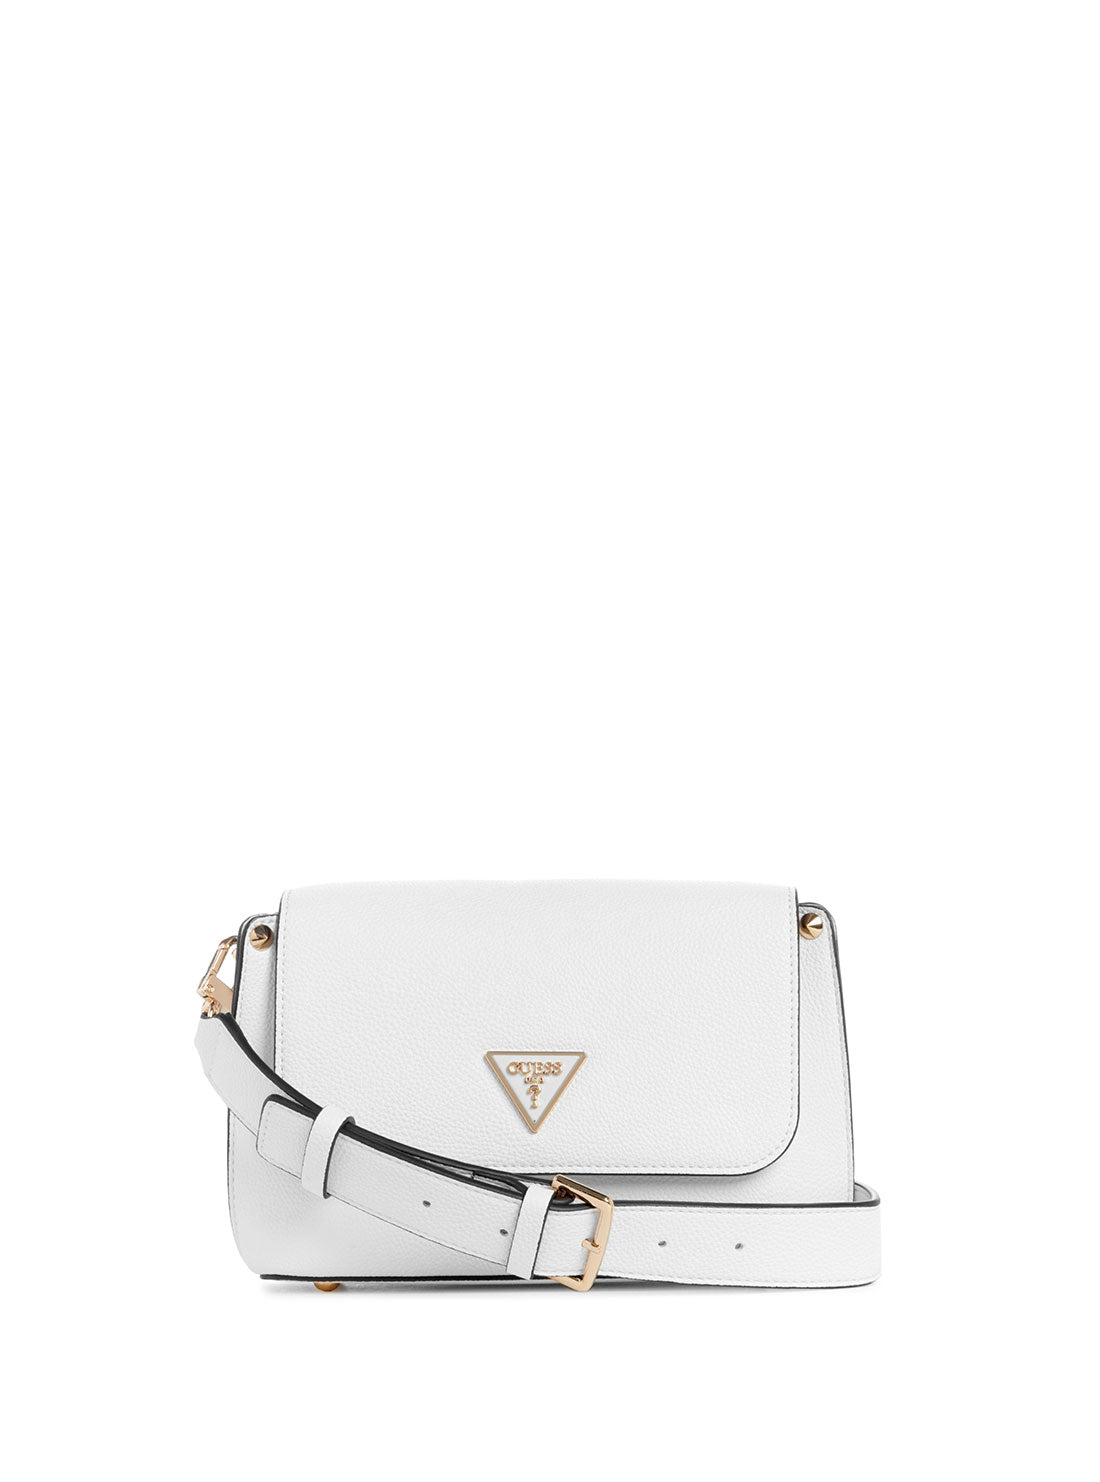 GUESS White Meridian Shoulder Bag front view